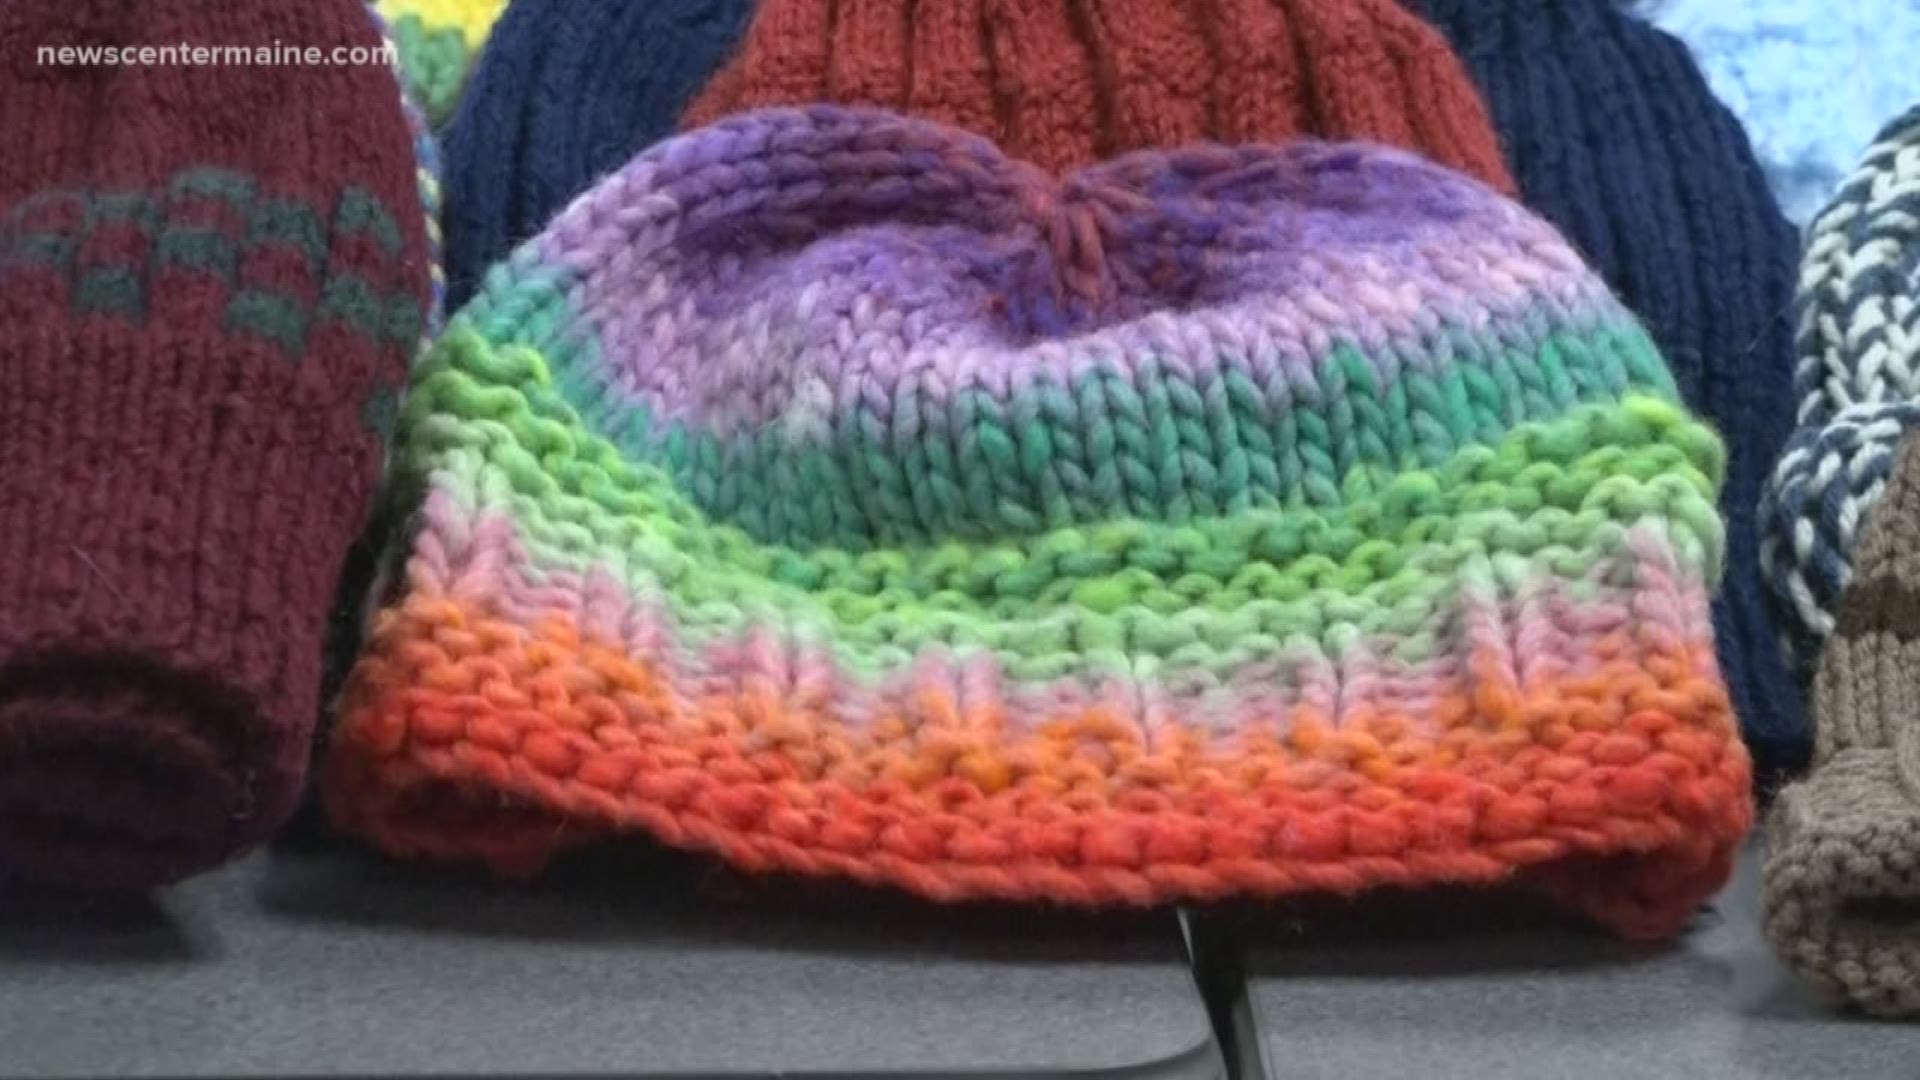 "Hats for the Homeless" is in its fifth year giving winter apparel to the homeless